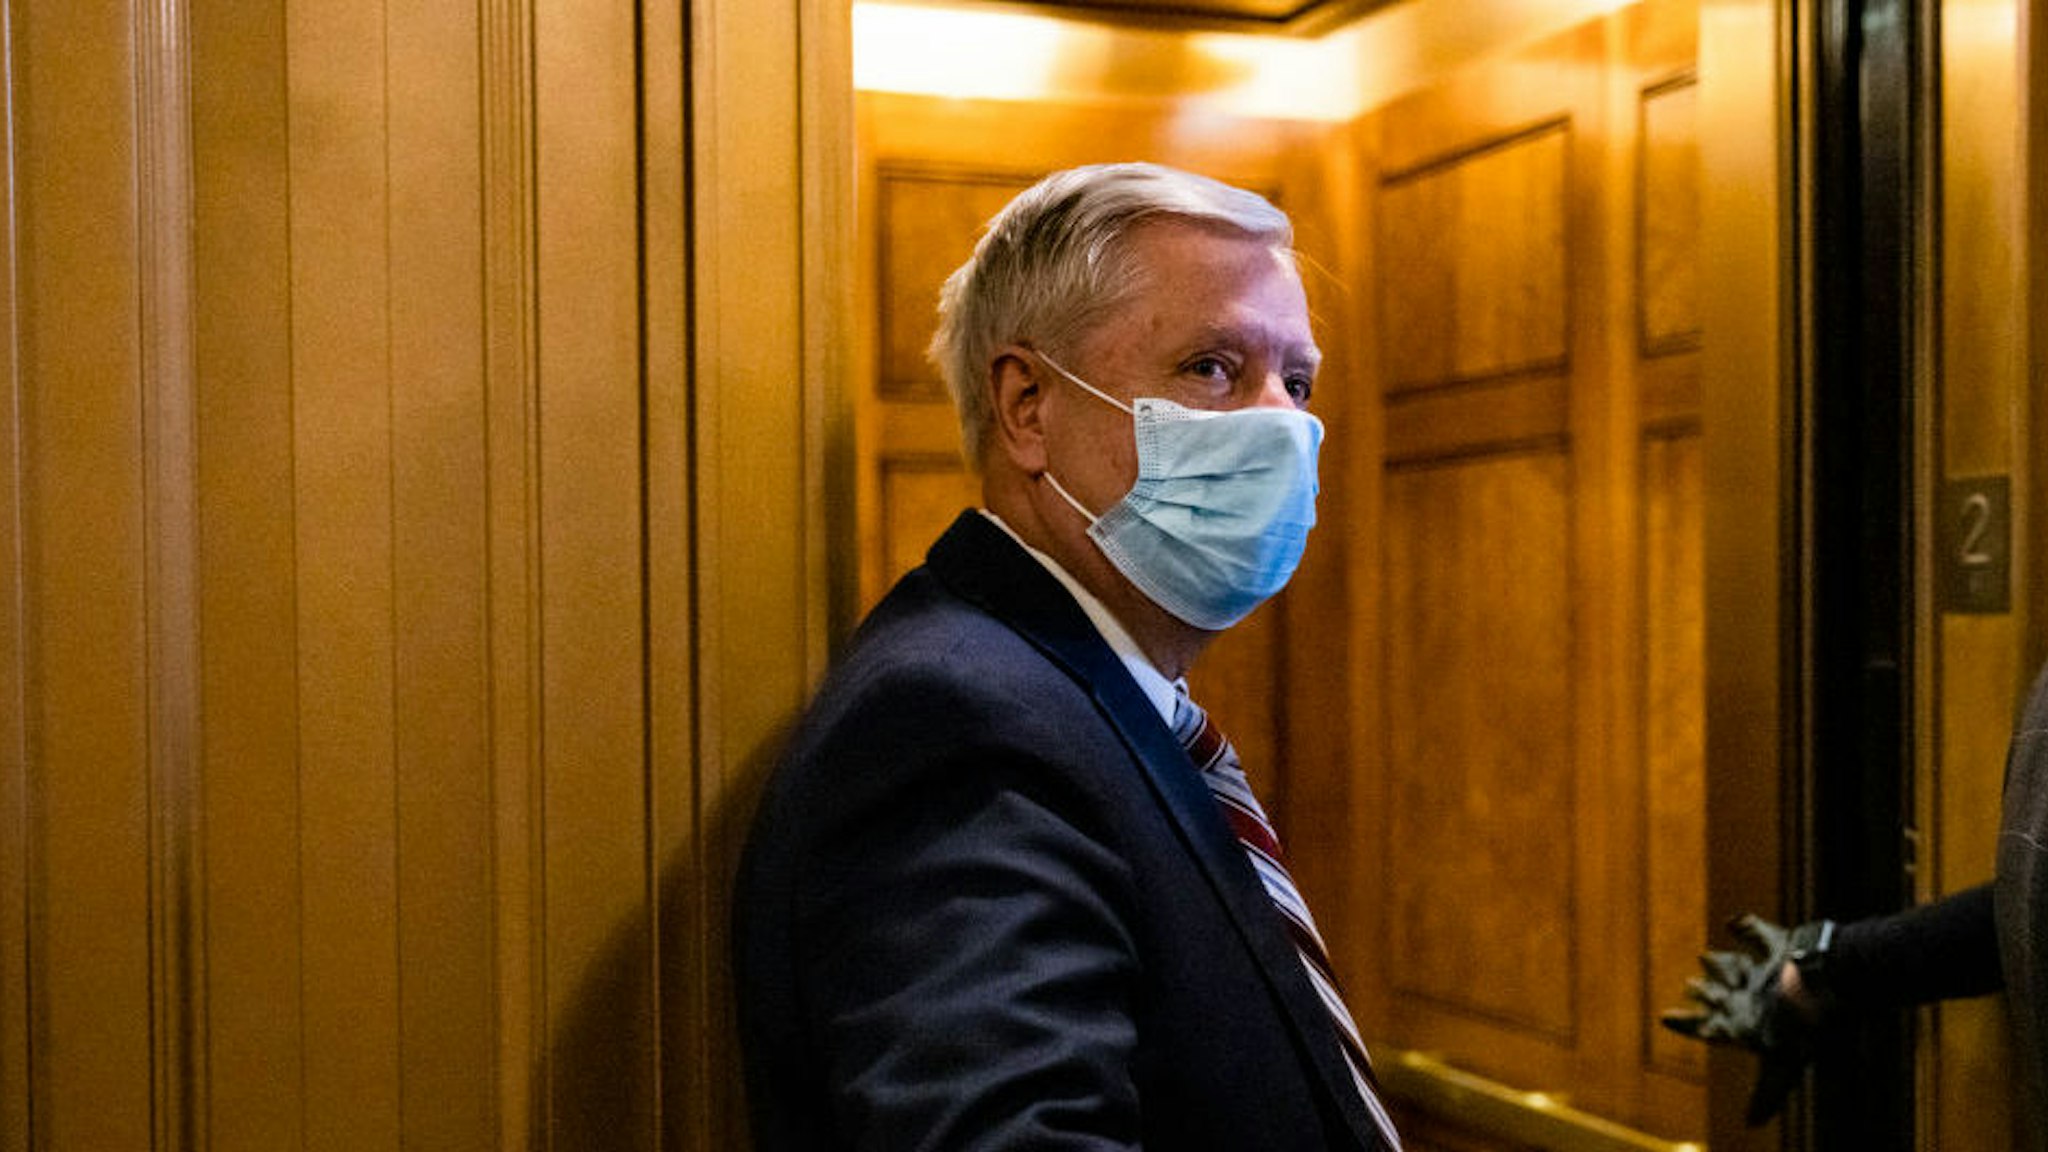 WASHINGTON, DC - JANUARY 26: Senator Lindsey Graham (R-SC) leaves the floor of the Senate following a vote on January 26, 2021 in Washington, DC. Today senators will be sworn in as the jury for the second impeachment trial of former President Donald Trump. Senate President pro tempore Patrick Leahy (D-VT) will preside over the trial in place of Supreme Court Chief Justice John Roberts.